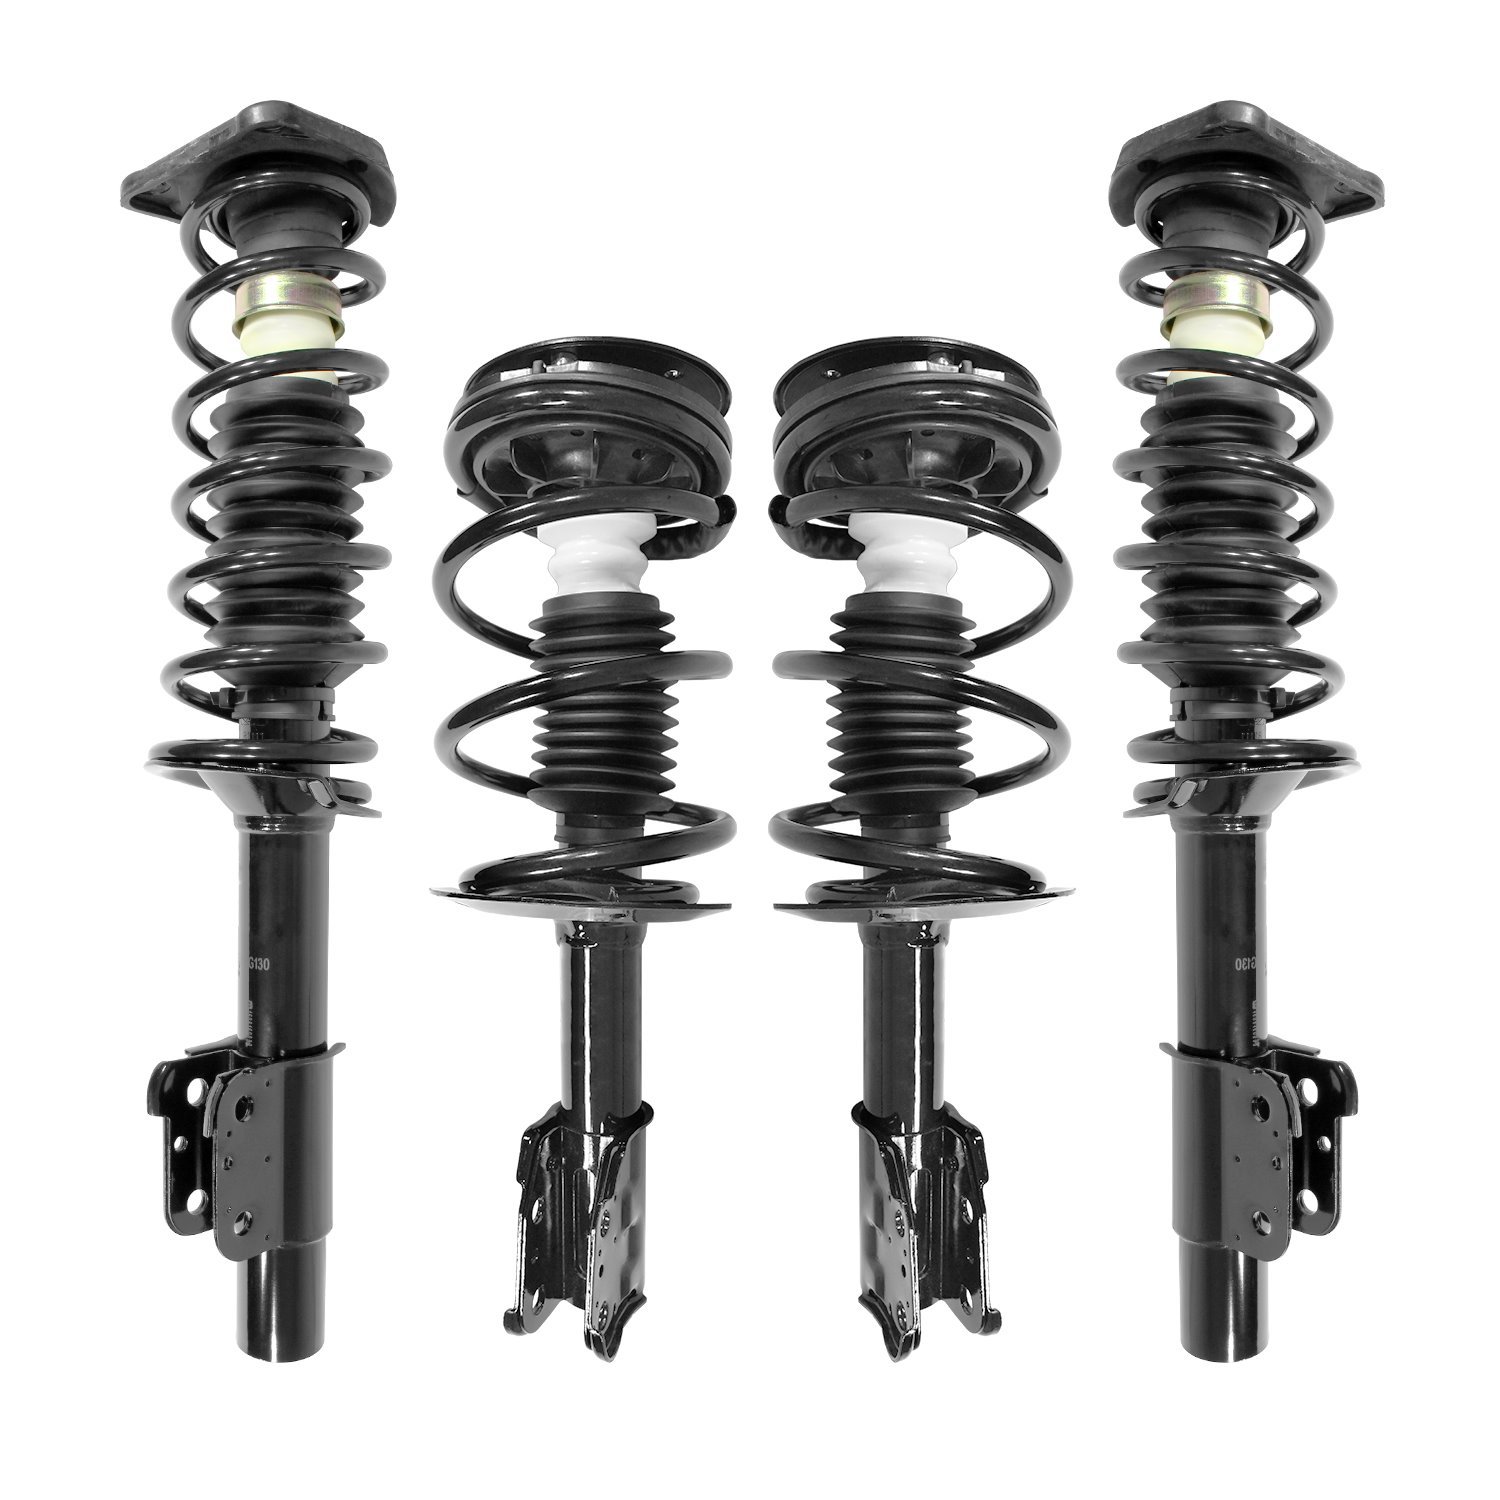 4-11110-15130-001 Front & Rear Suspension Strut & Coil Spring Assembly Kit Fits Select GM